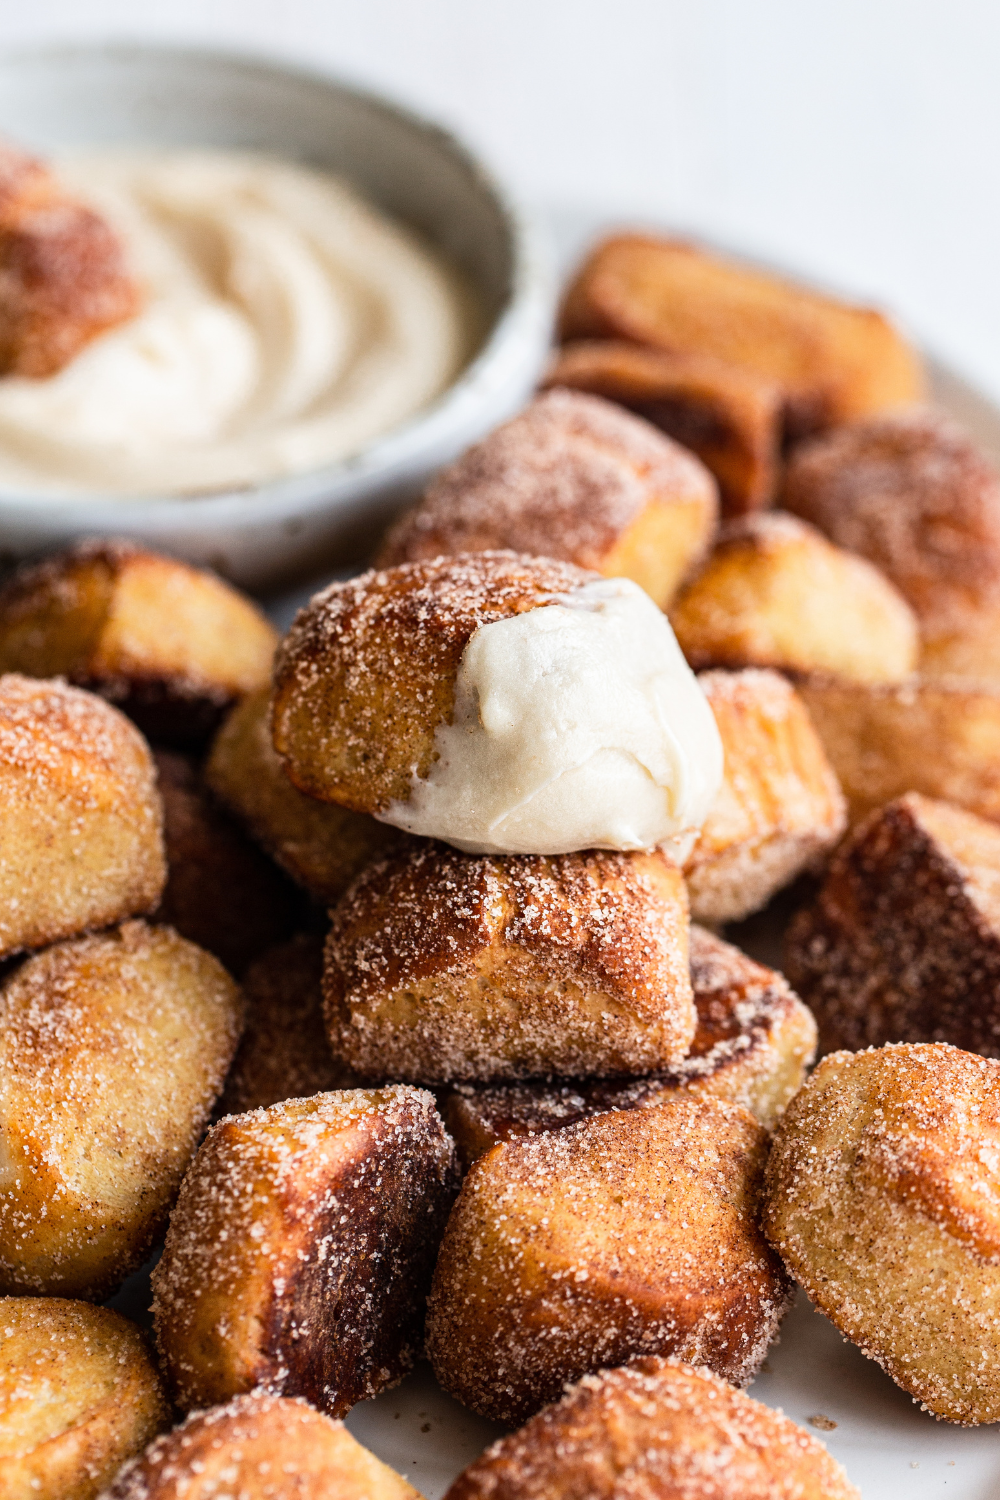 Cinnamon Sugar Pretzel Bites with cream cheese frosting for dipping, ready to serve